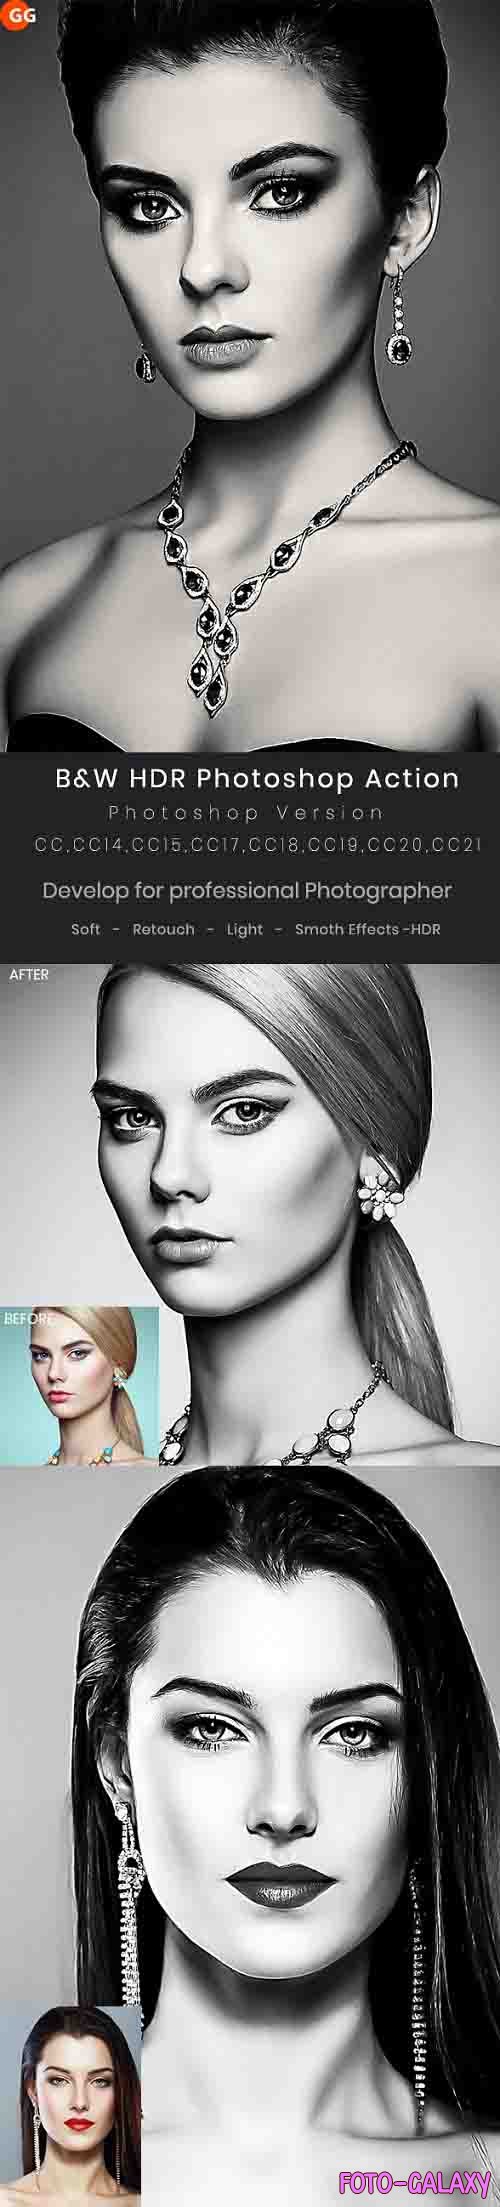 GraphicRiver - B&W HDR Photoshop Action 29947060